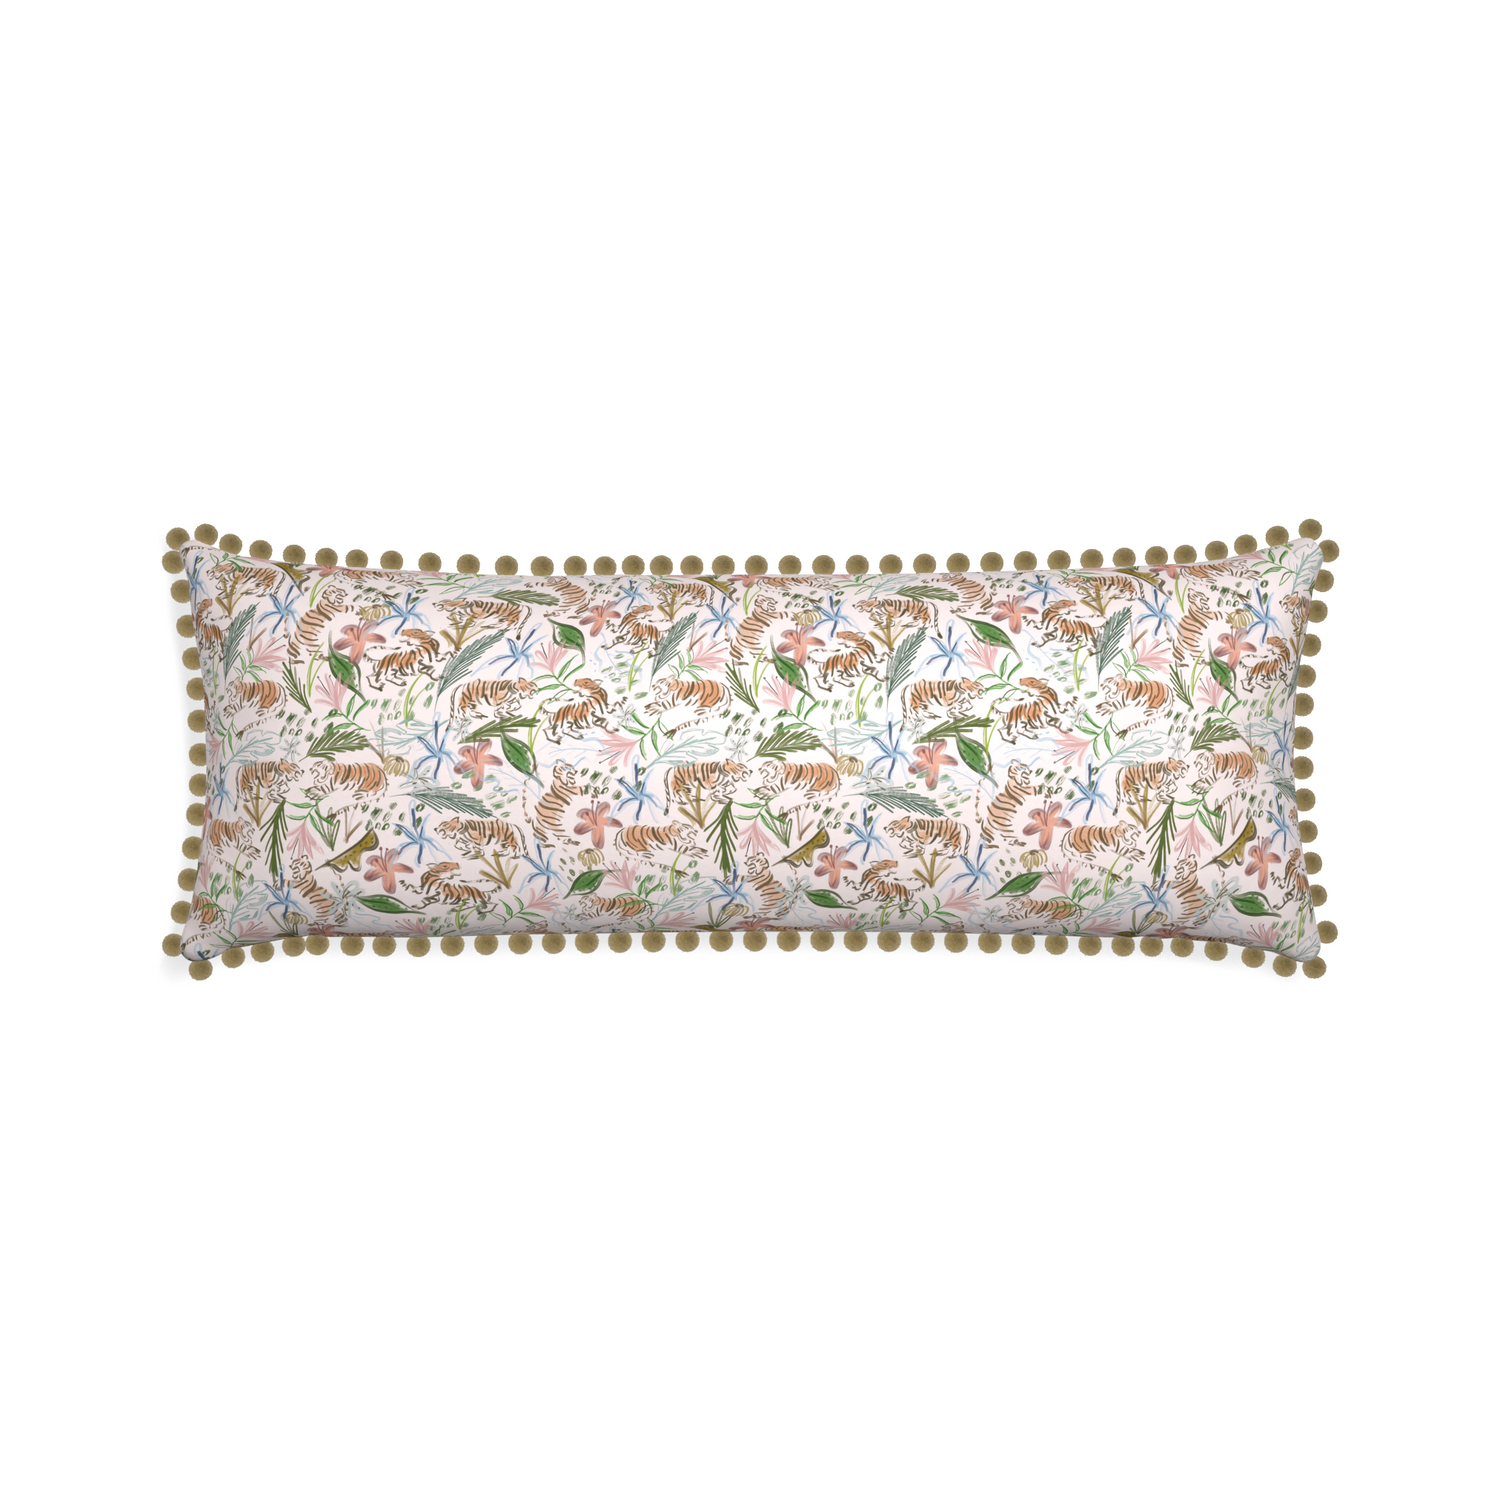 Xl-lumbar frida pink custom pink chinoiserie tigerpillow with olive pom pom on white background